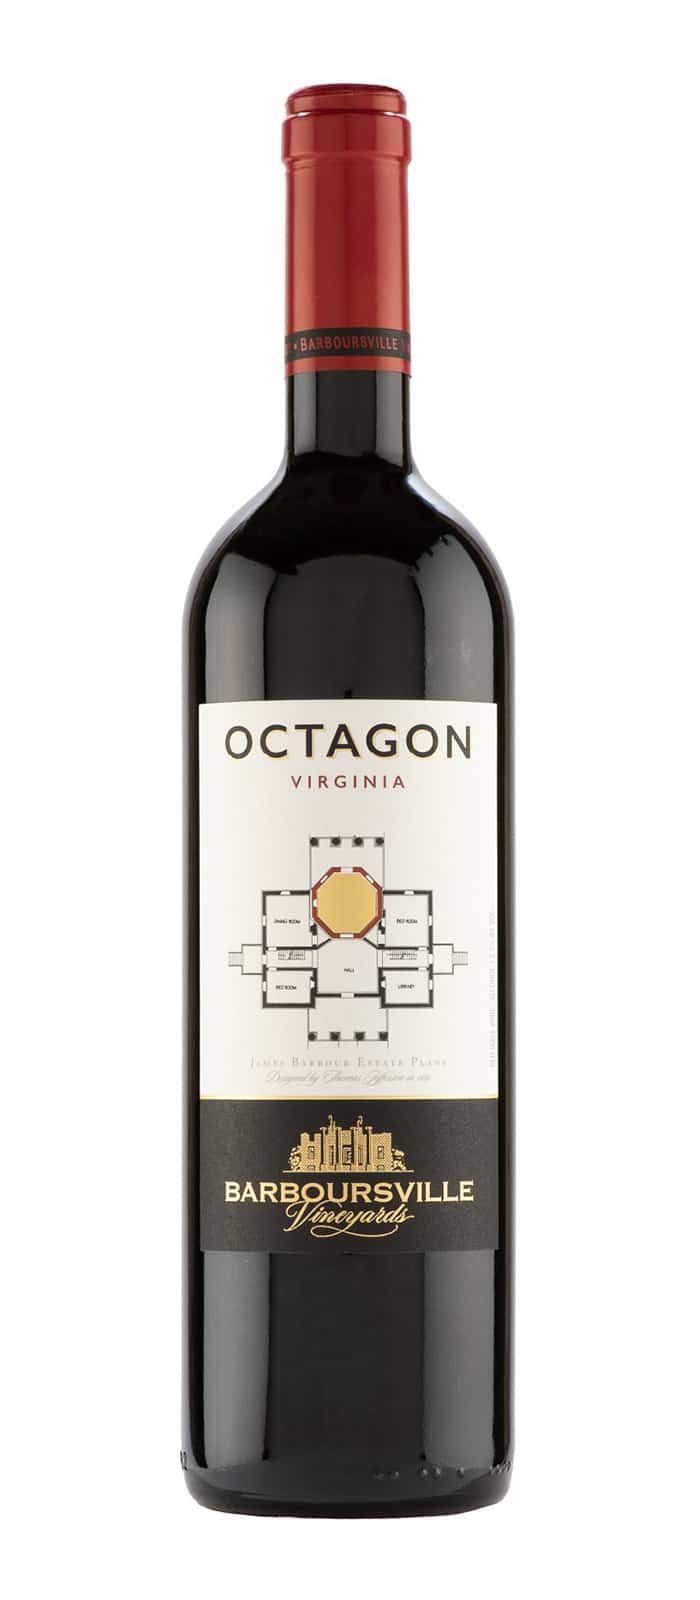 Bottle of Barboursville Vineyards 2020 Octagon, Gold Medal, Virginia Governor's Cup Wine Competition.